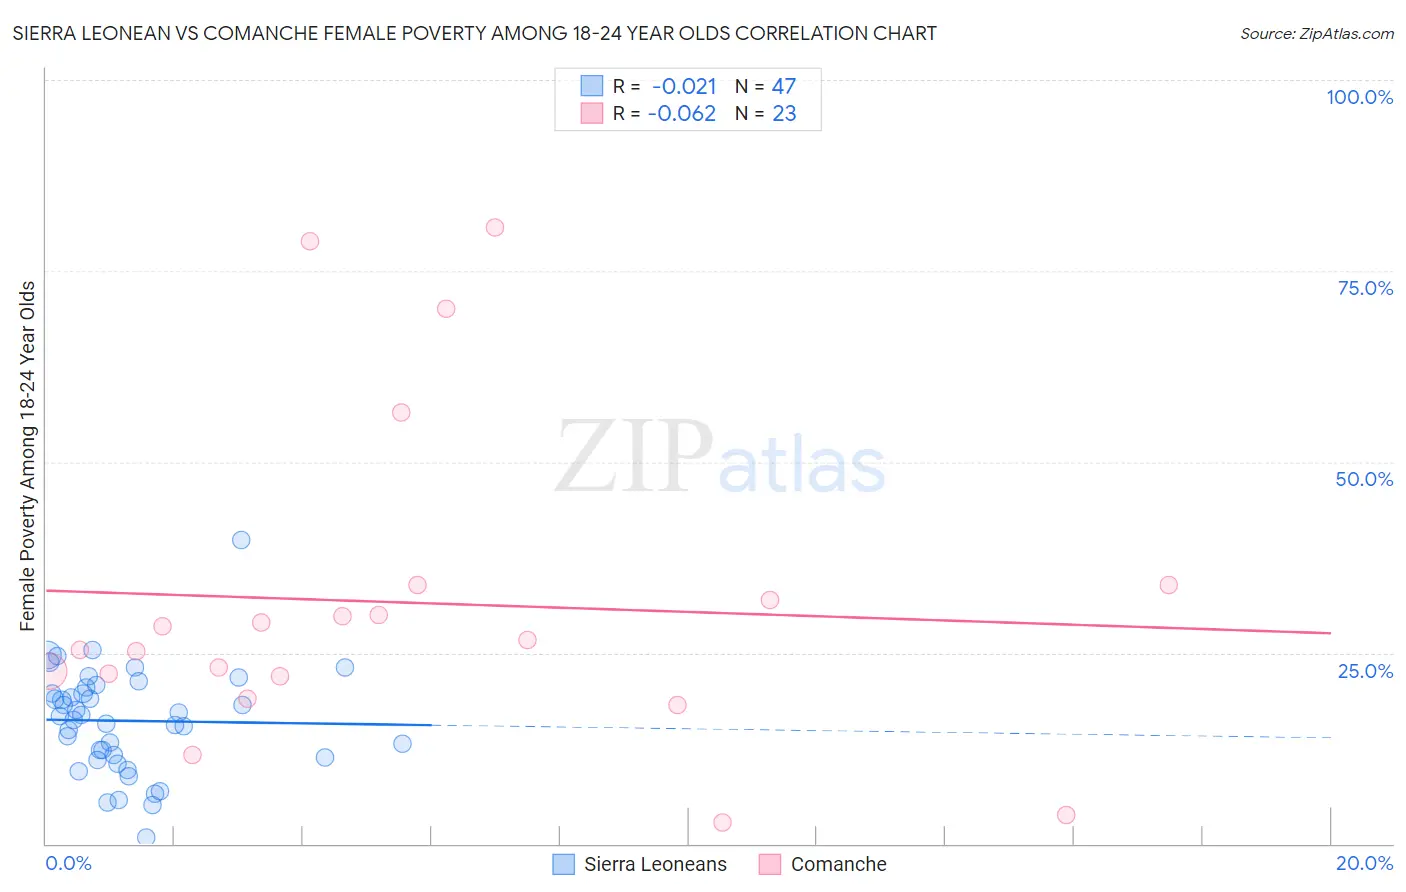 Sierra Leonean vs Comanche Female Poverty Among 18-24 Year Olds